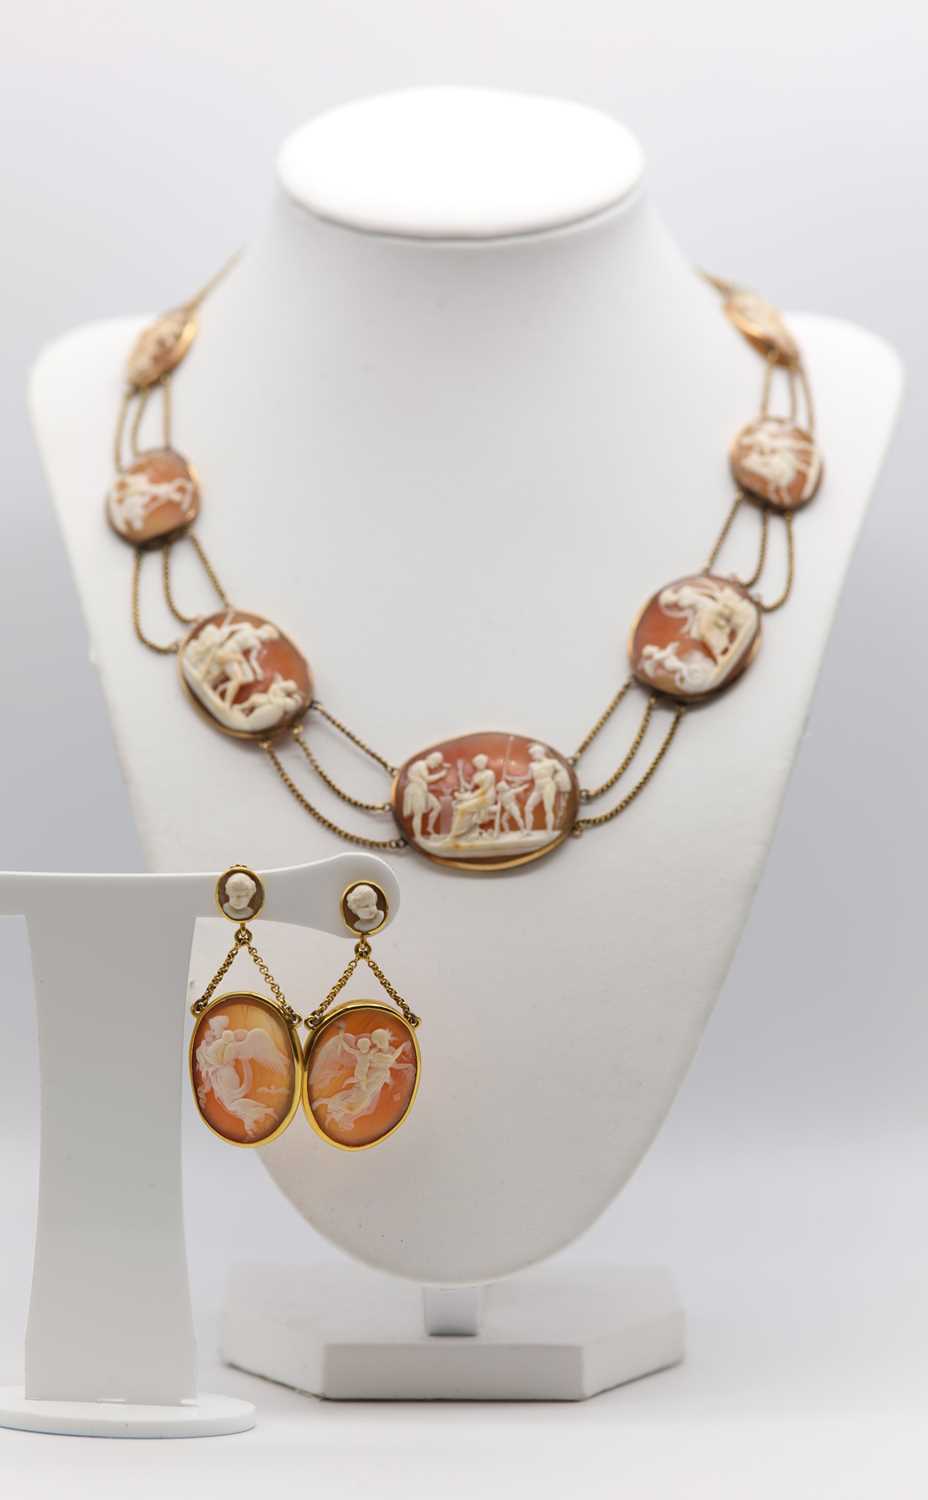 Lot 35 - An early 19th century carved shell cameo necklace and earrings suite